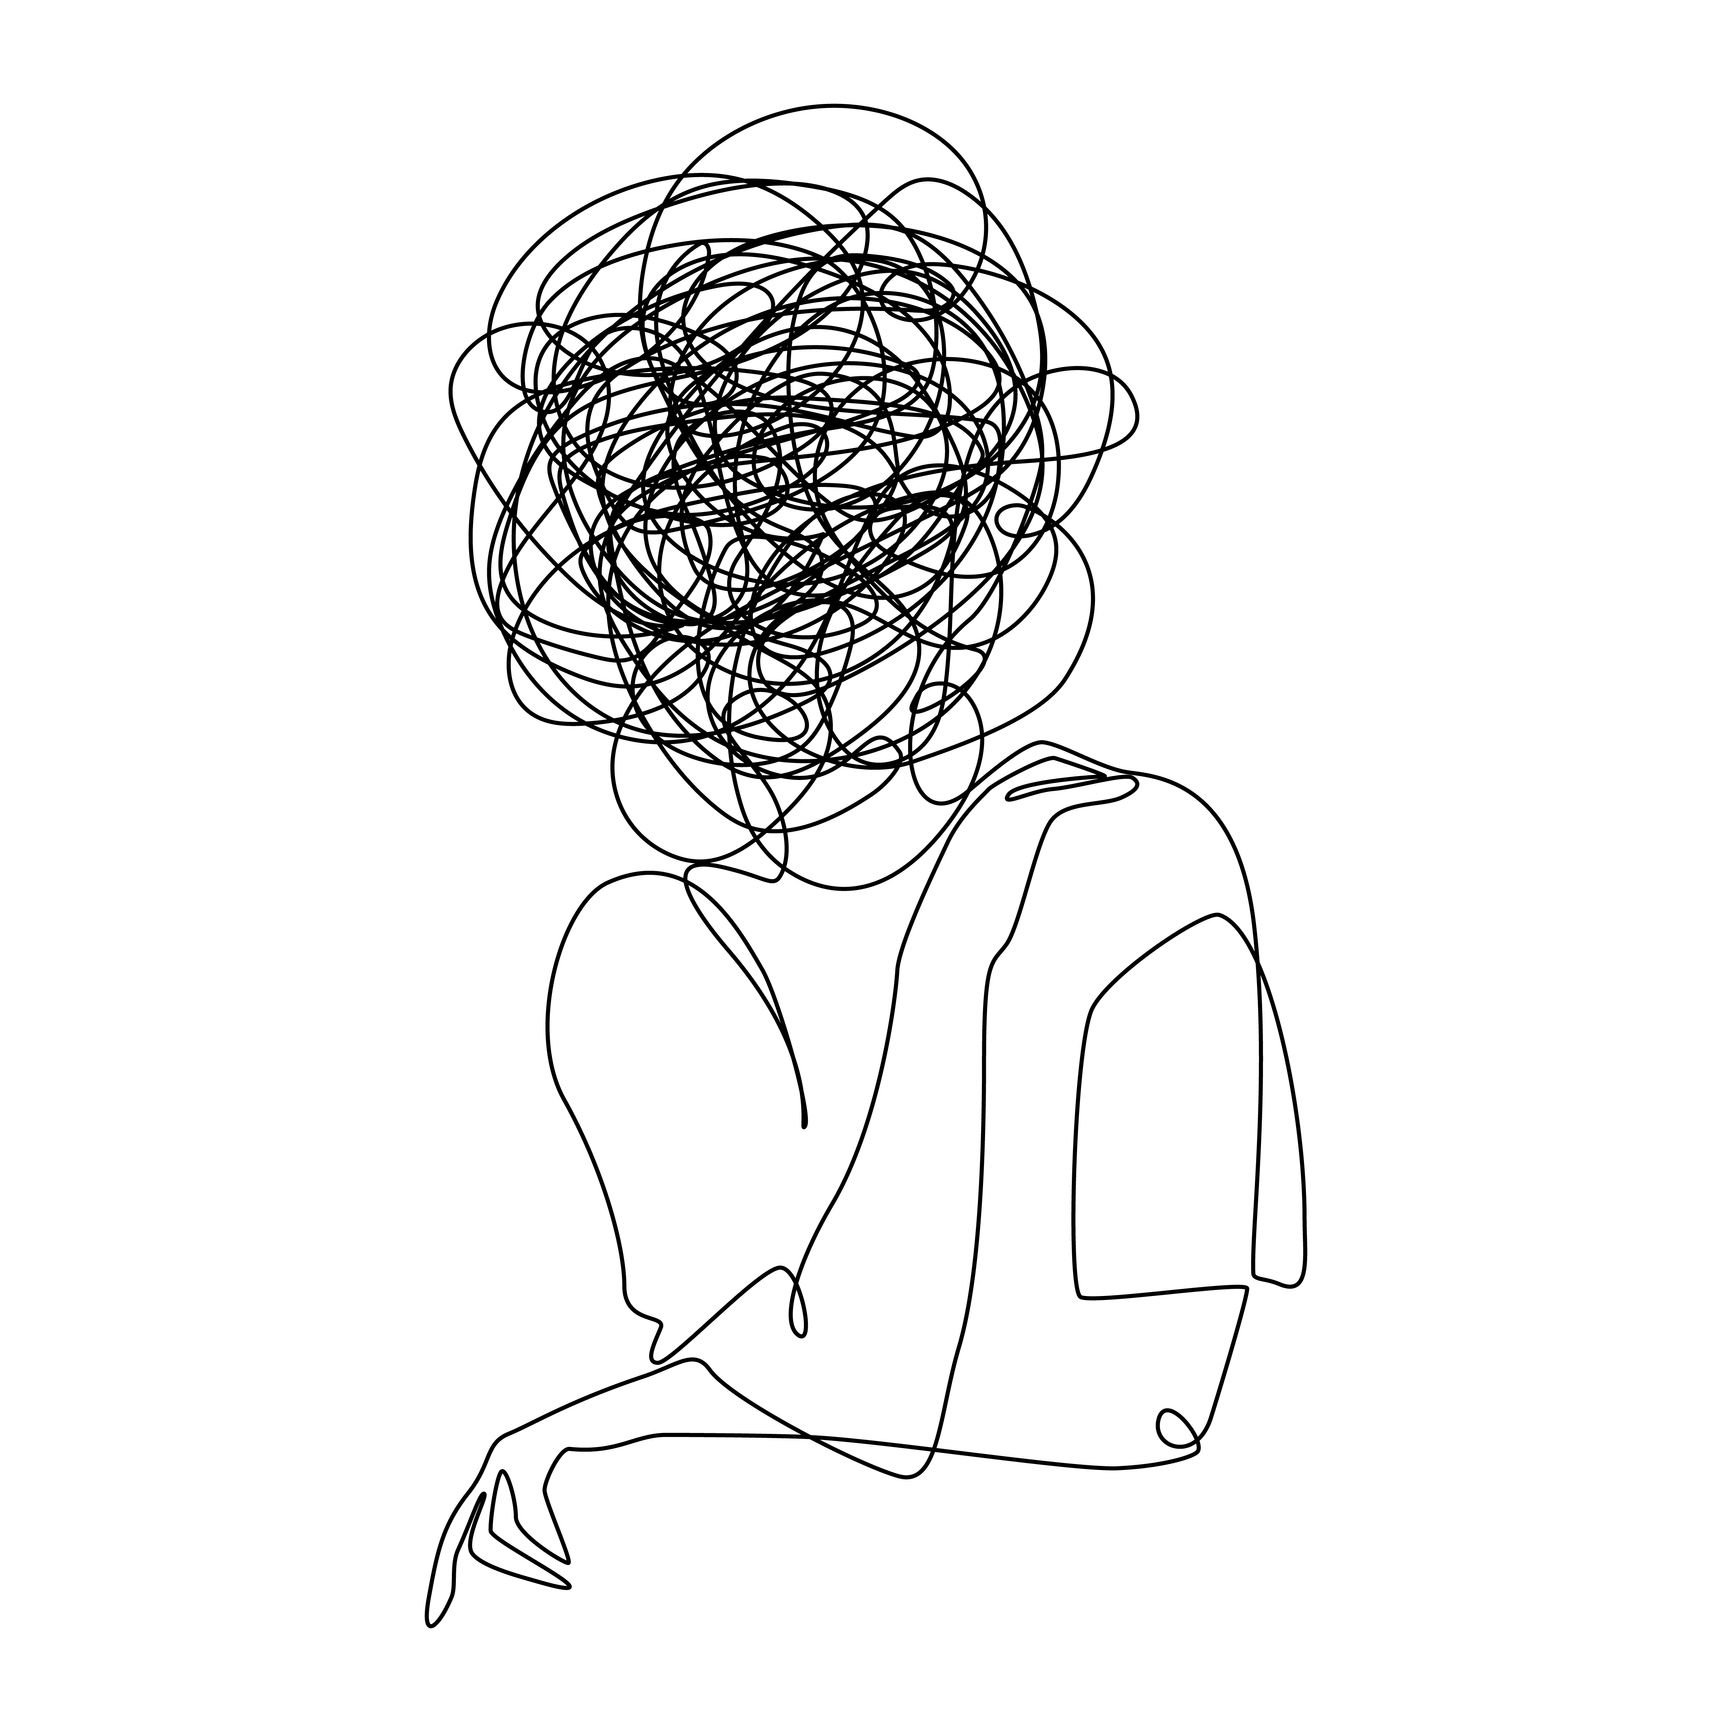 A doodle of someone with anxiety.